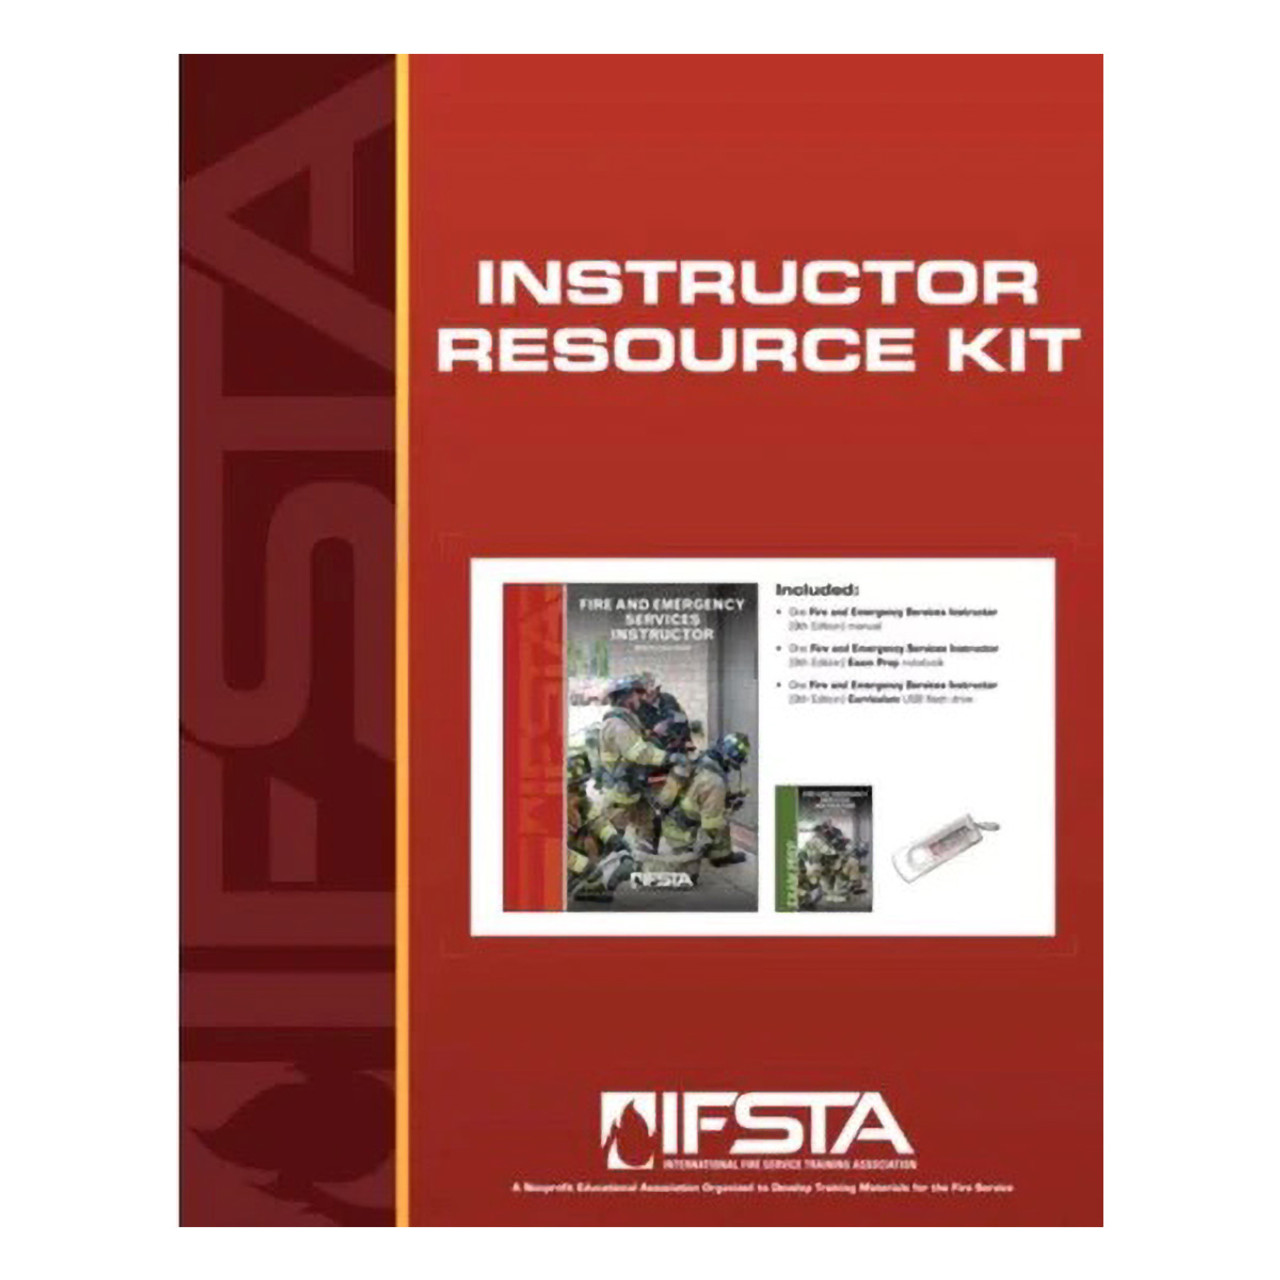 Ifsta pumping and aerial 3rd edition